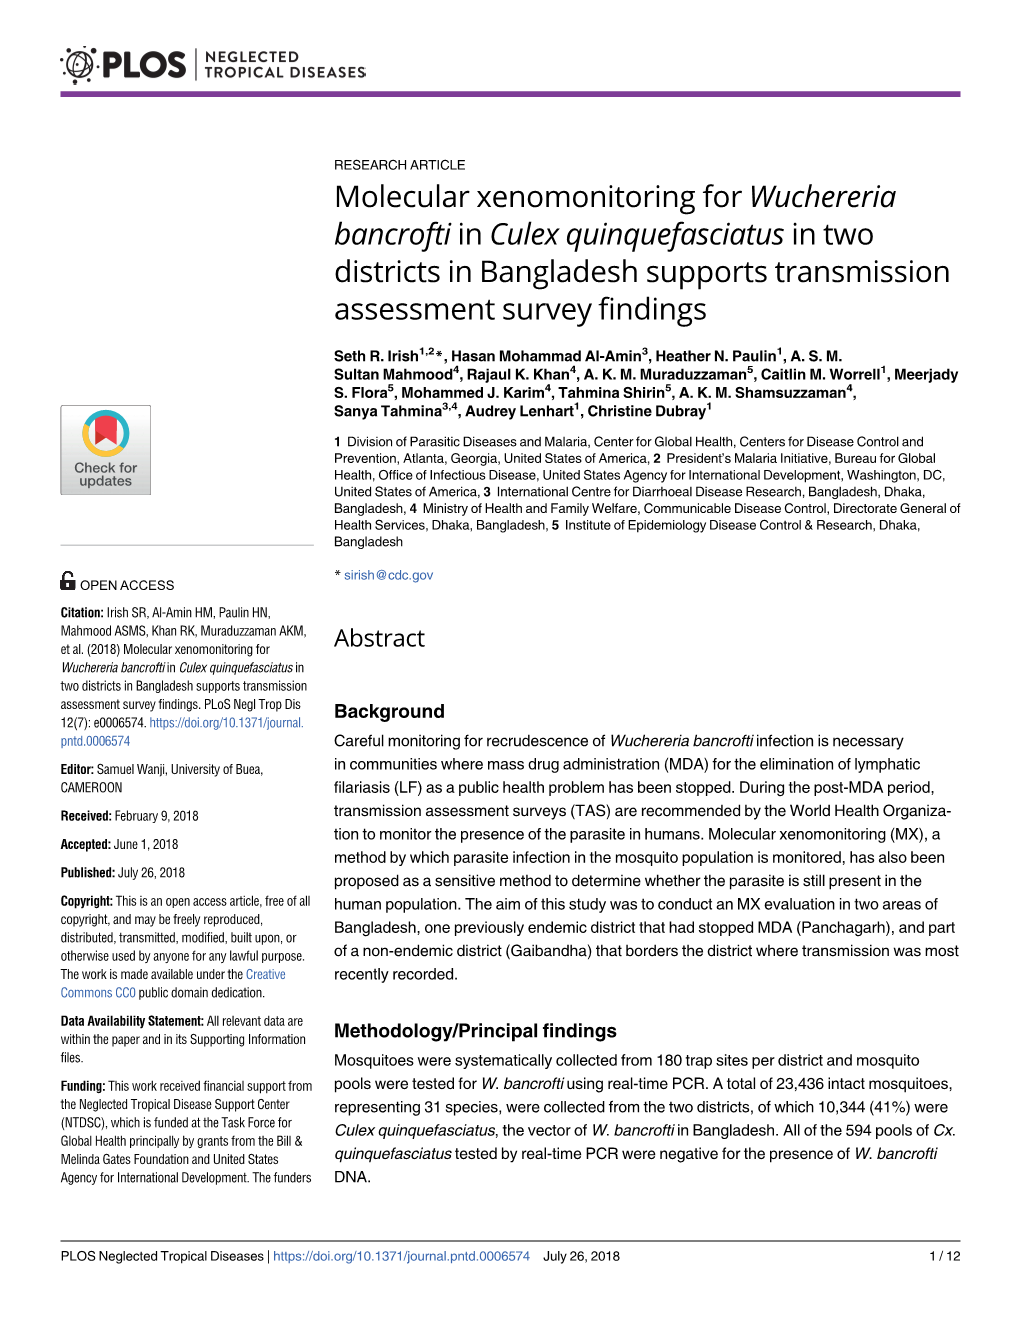 Molecular Xenomonitoring for Wuchereria Bancrofti in Culex Quinquefasciatus in Two Districts in Bangladesh Supports Transmission Assessment Survey Findings